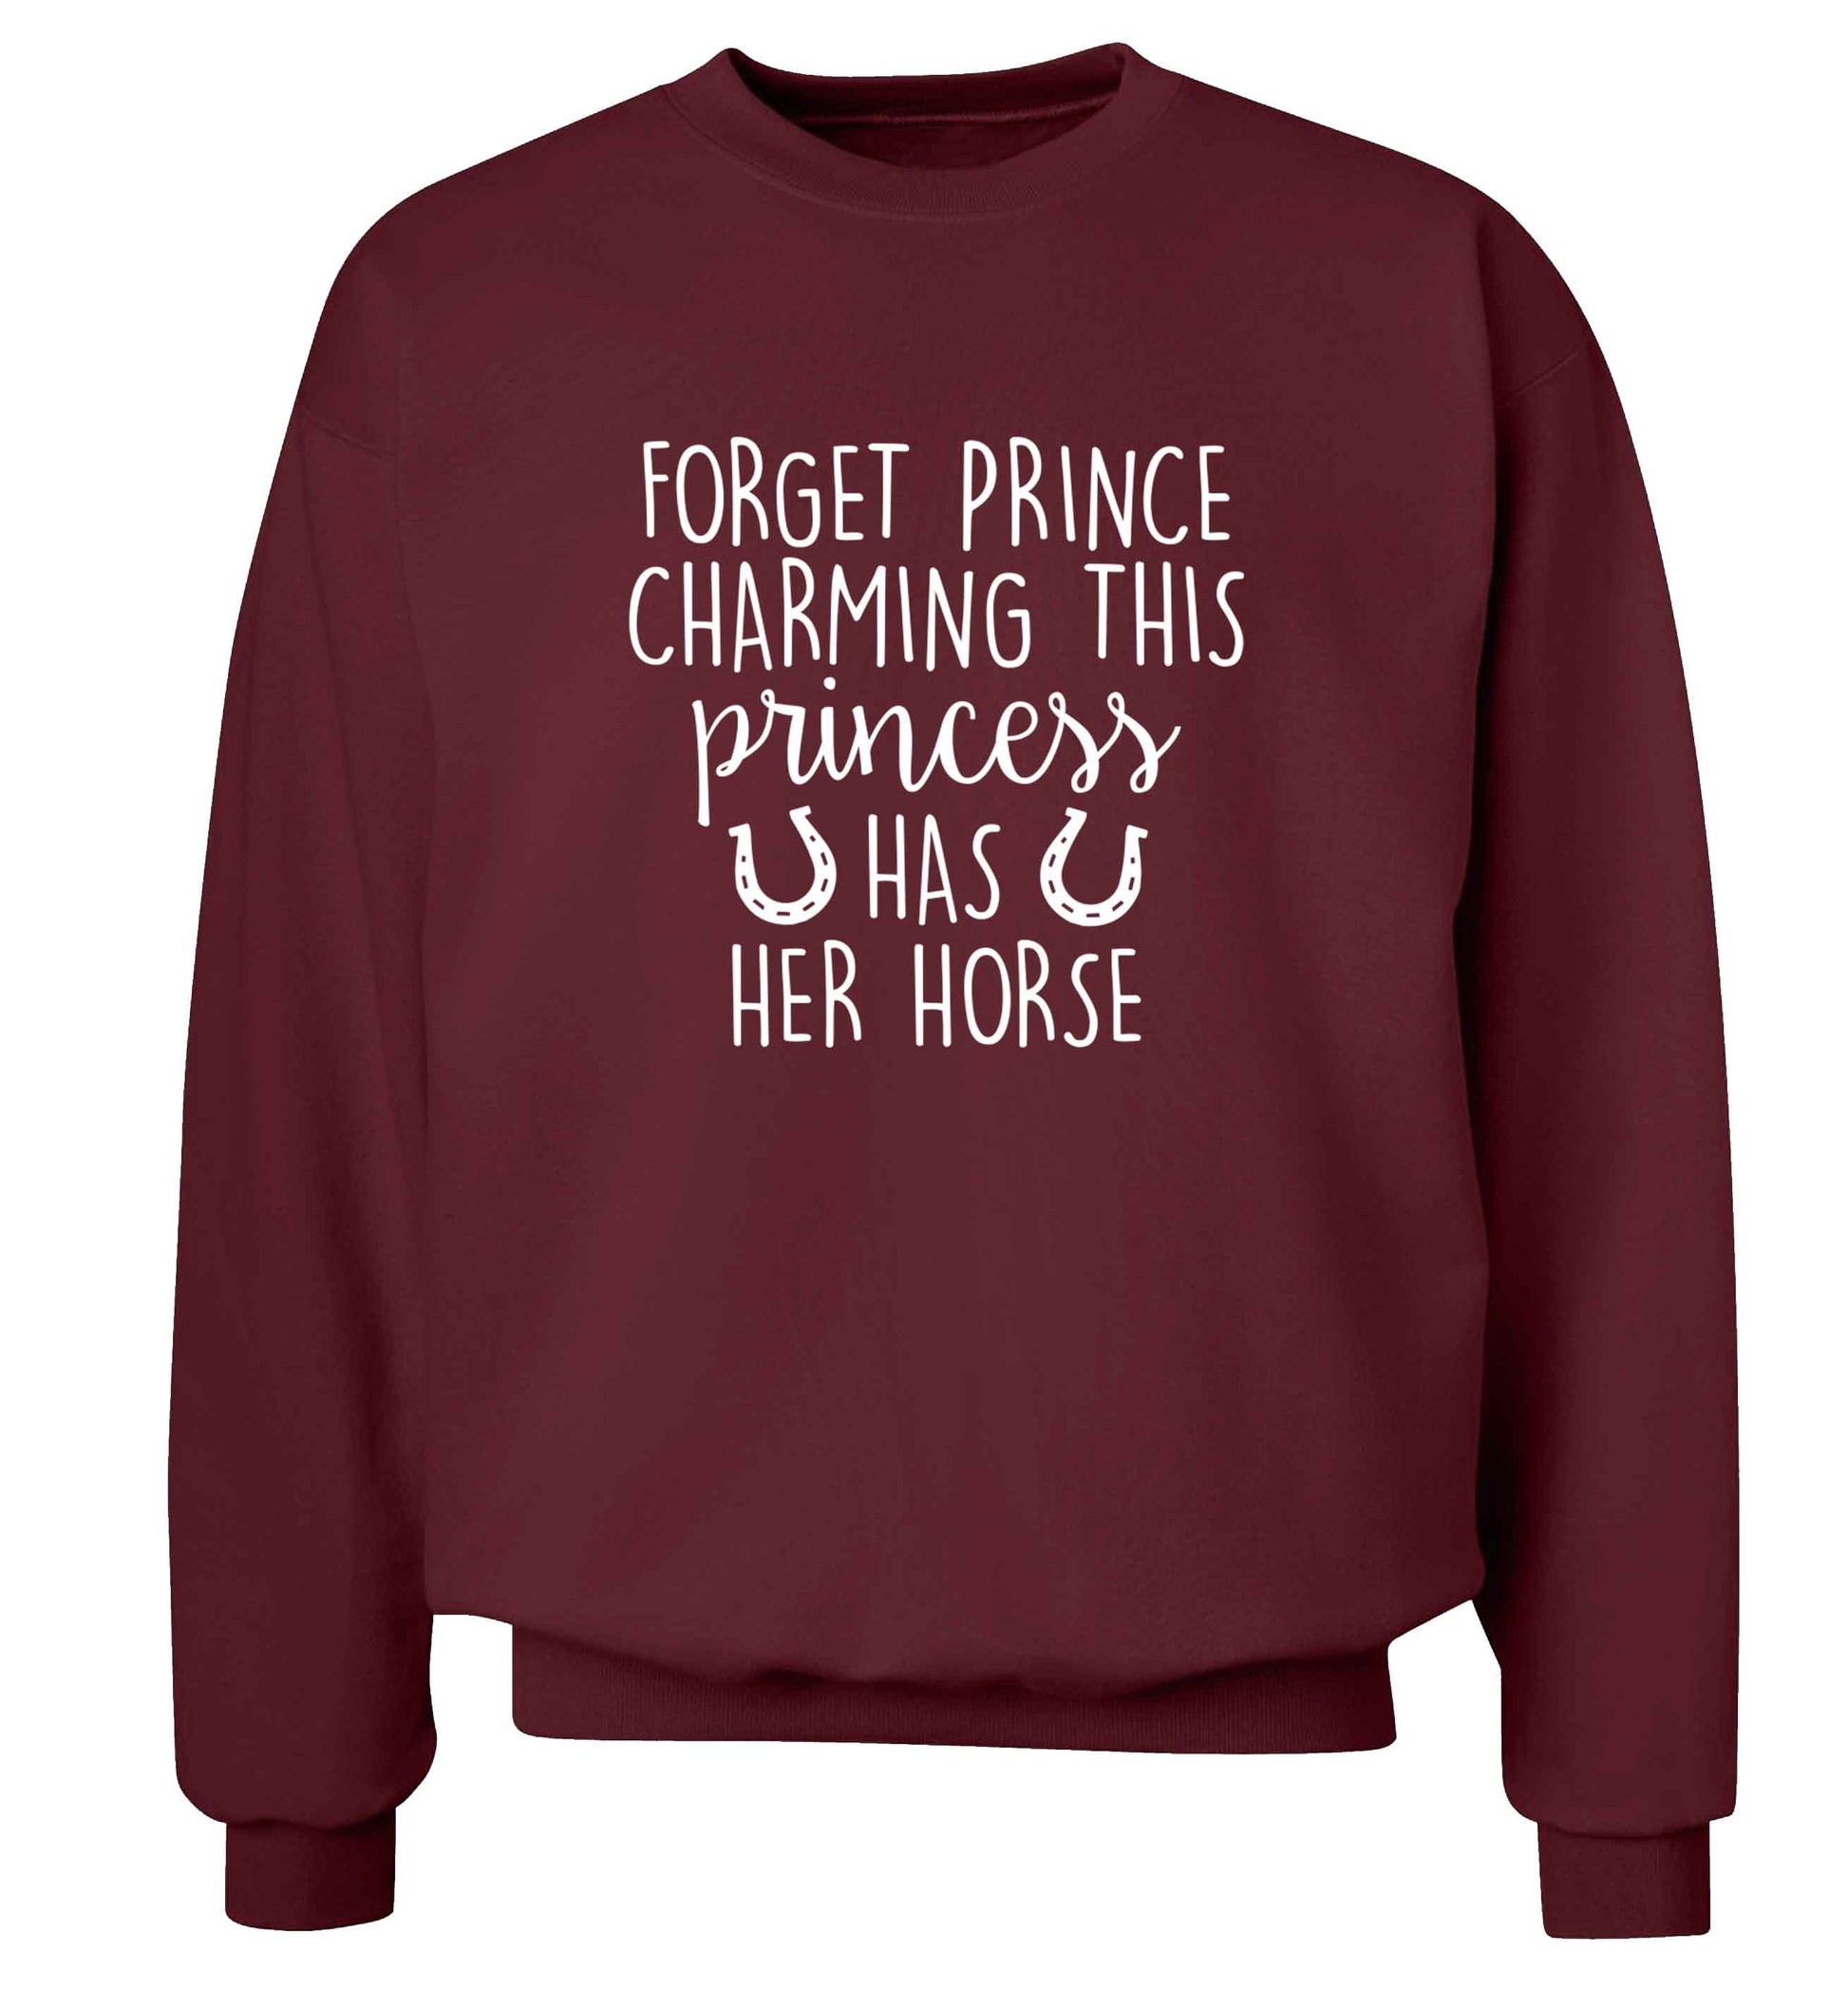 Forget prince charming this princess has her horse adult's unisex maroon sweater 2XL